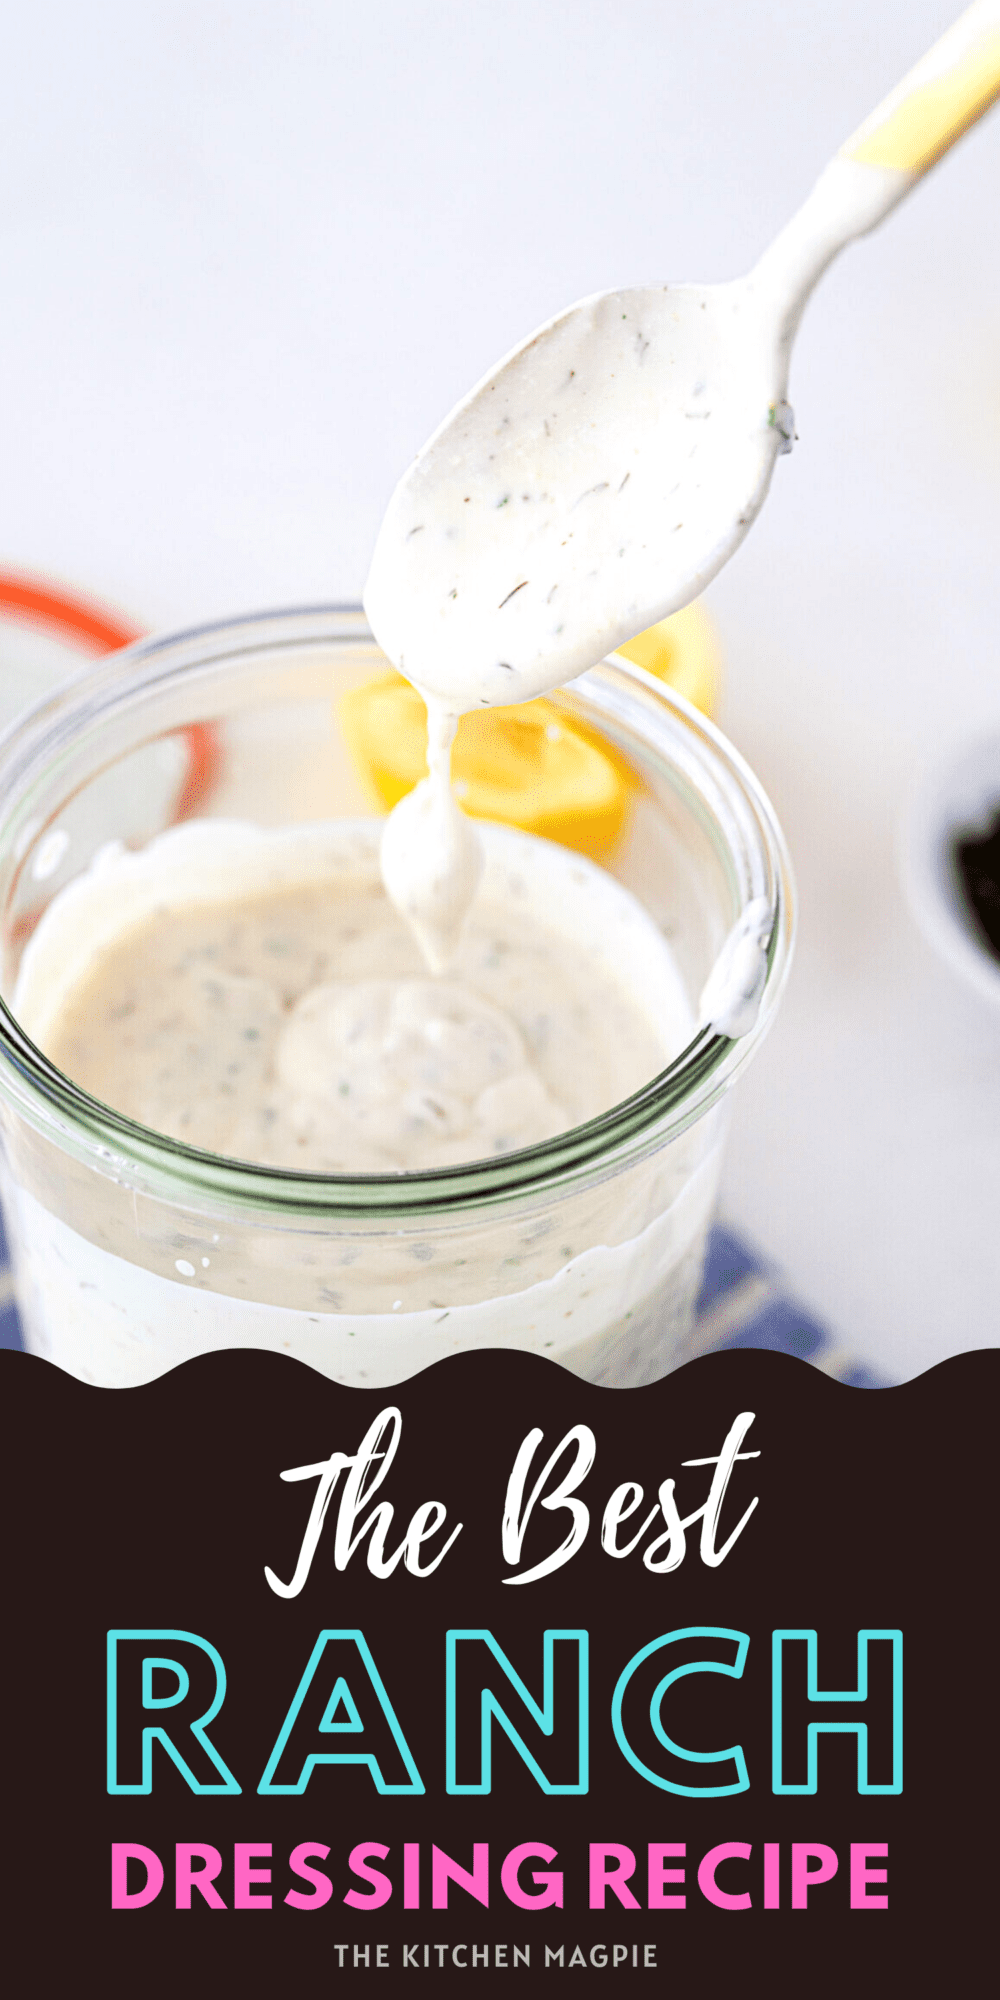 This creamy homemade ranch dressing is so delicious and easy to customize to your own liking that you'll never buy store bought again!